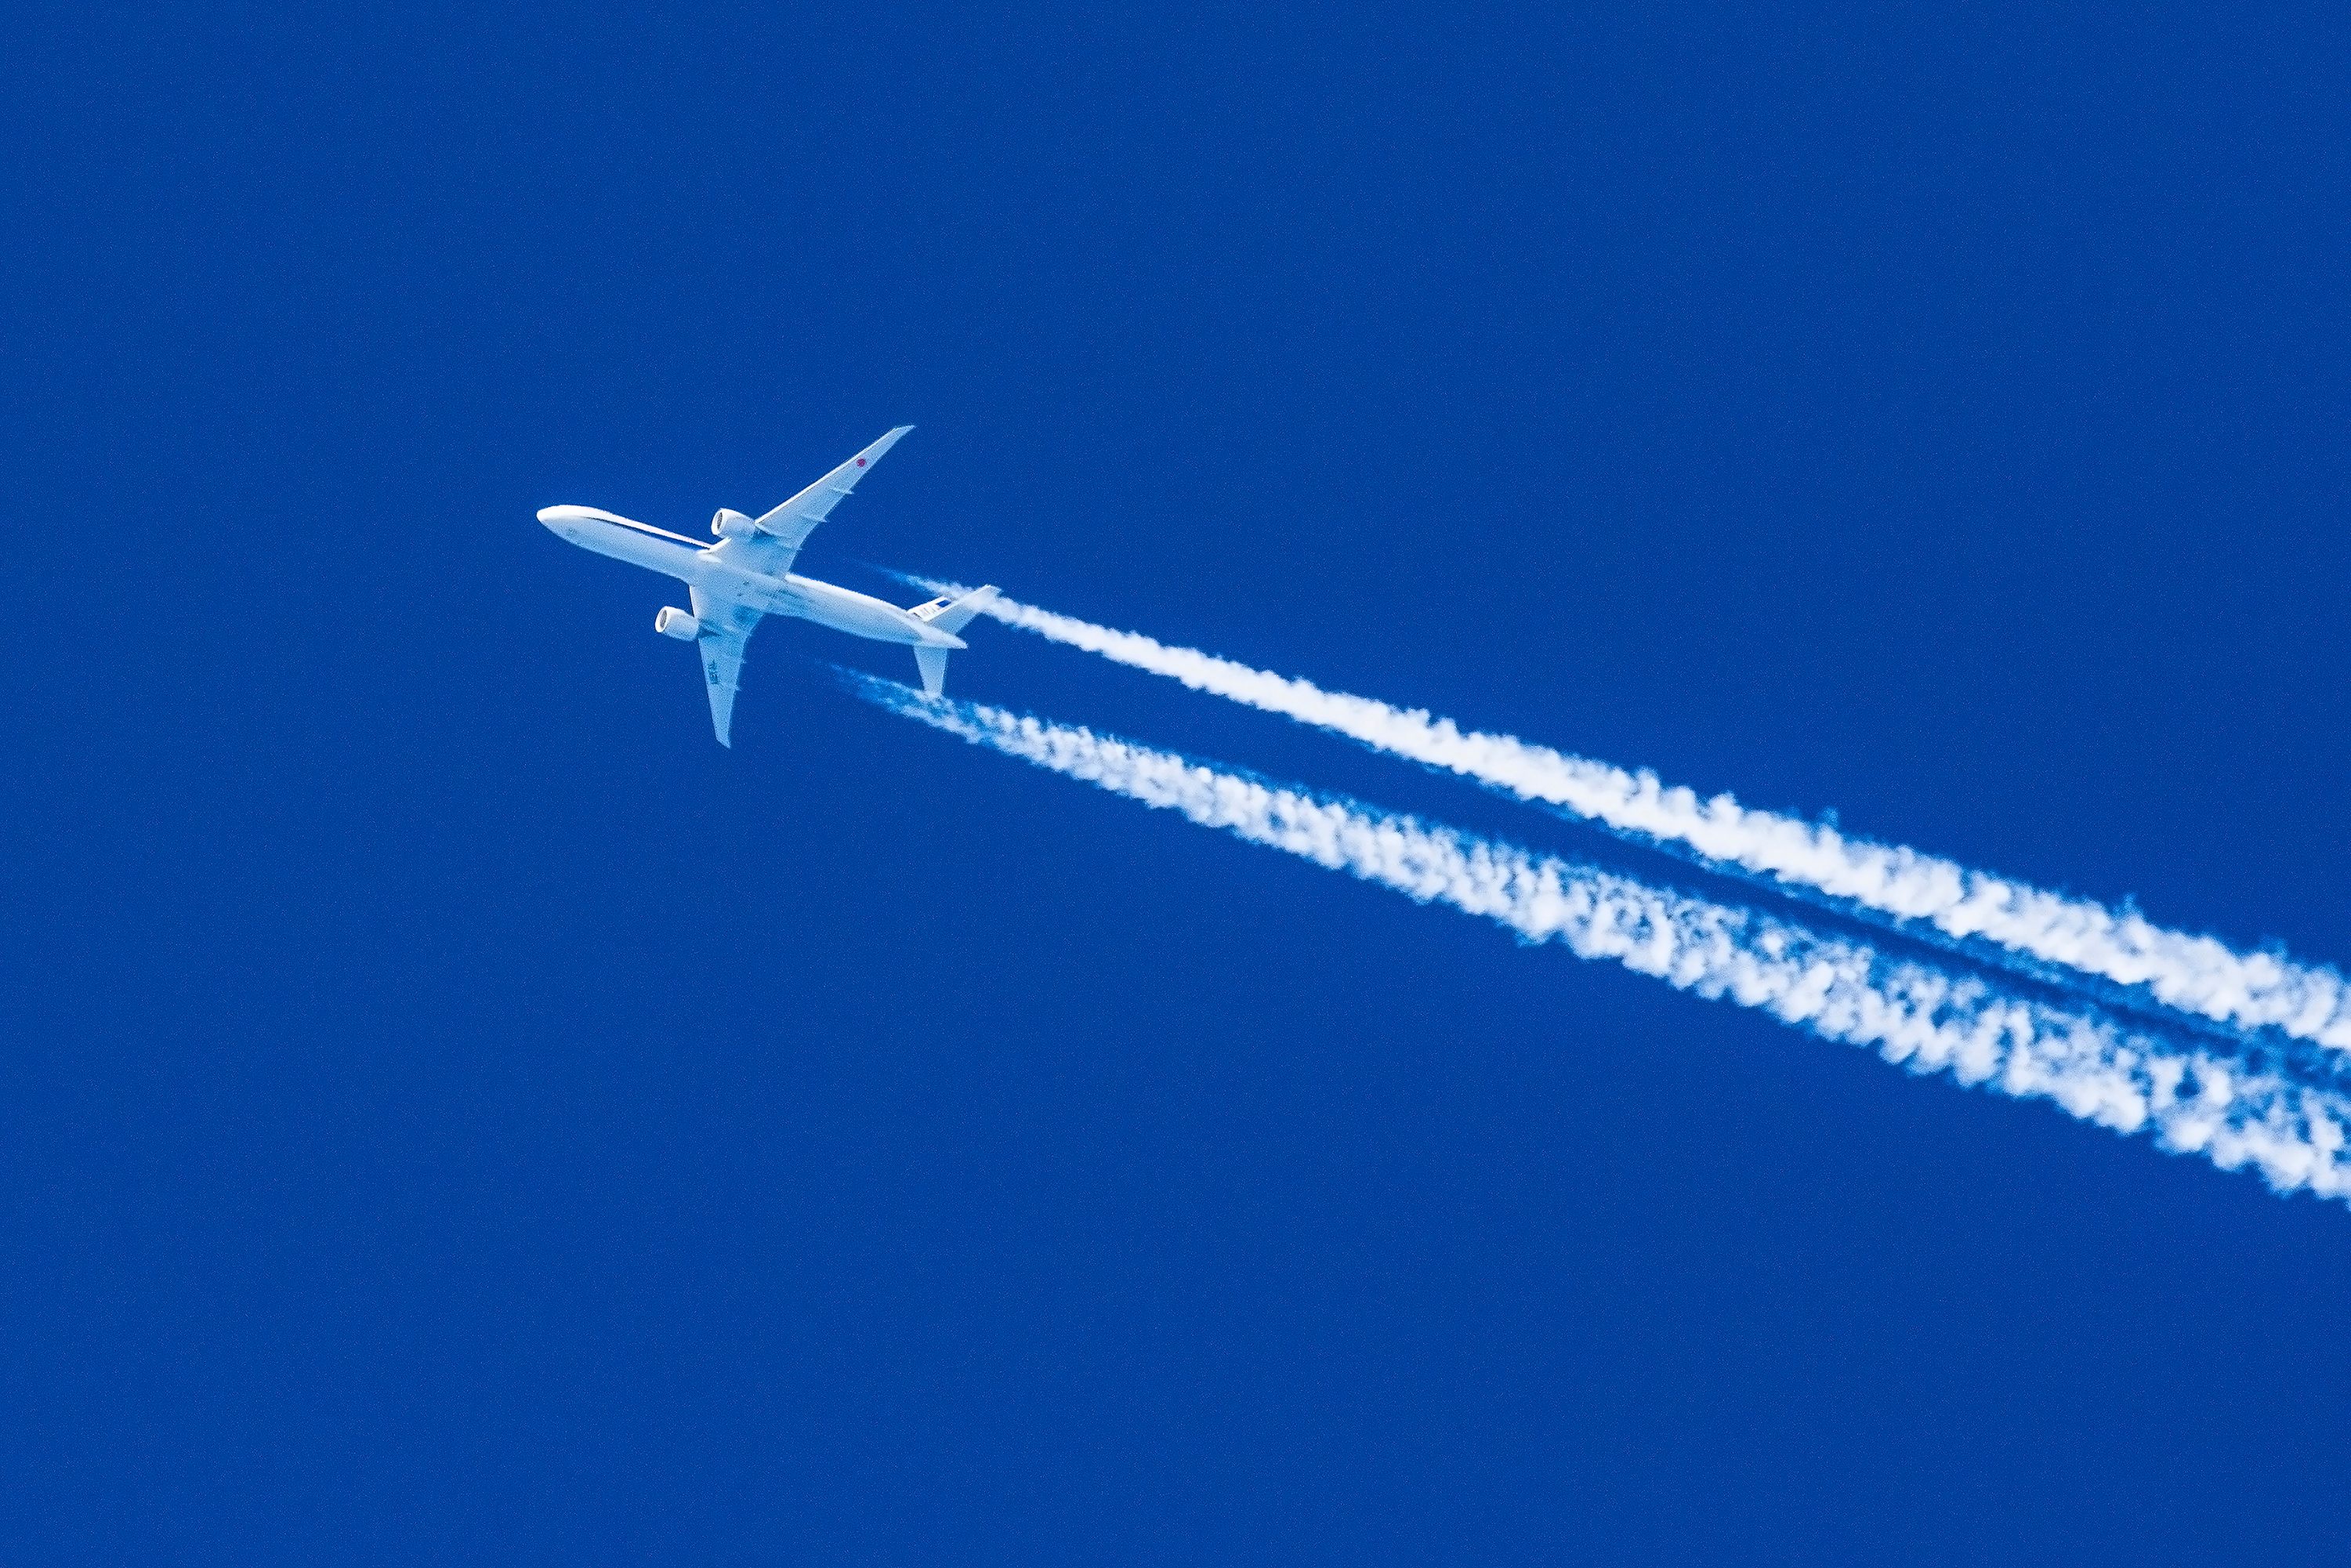 Sharp telephoto close-up of jet plane aircraft with contrails.